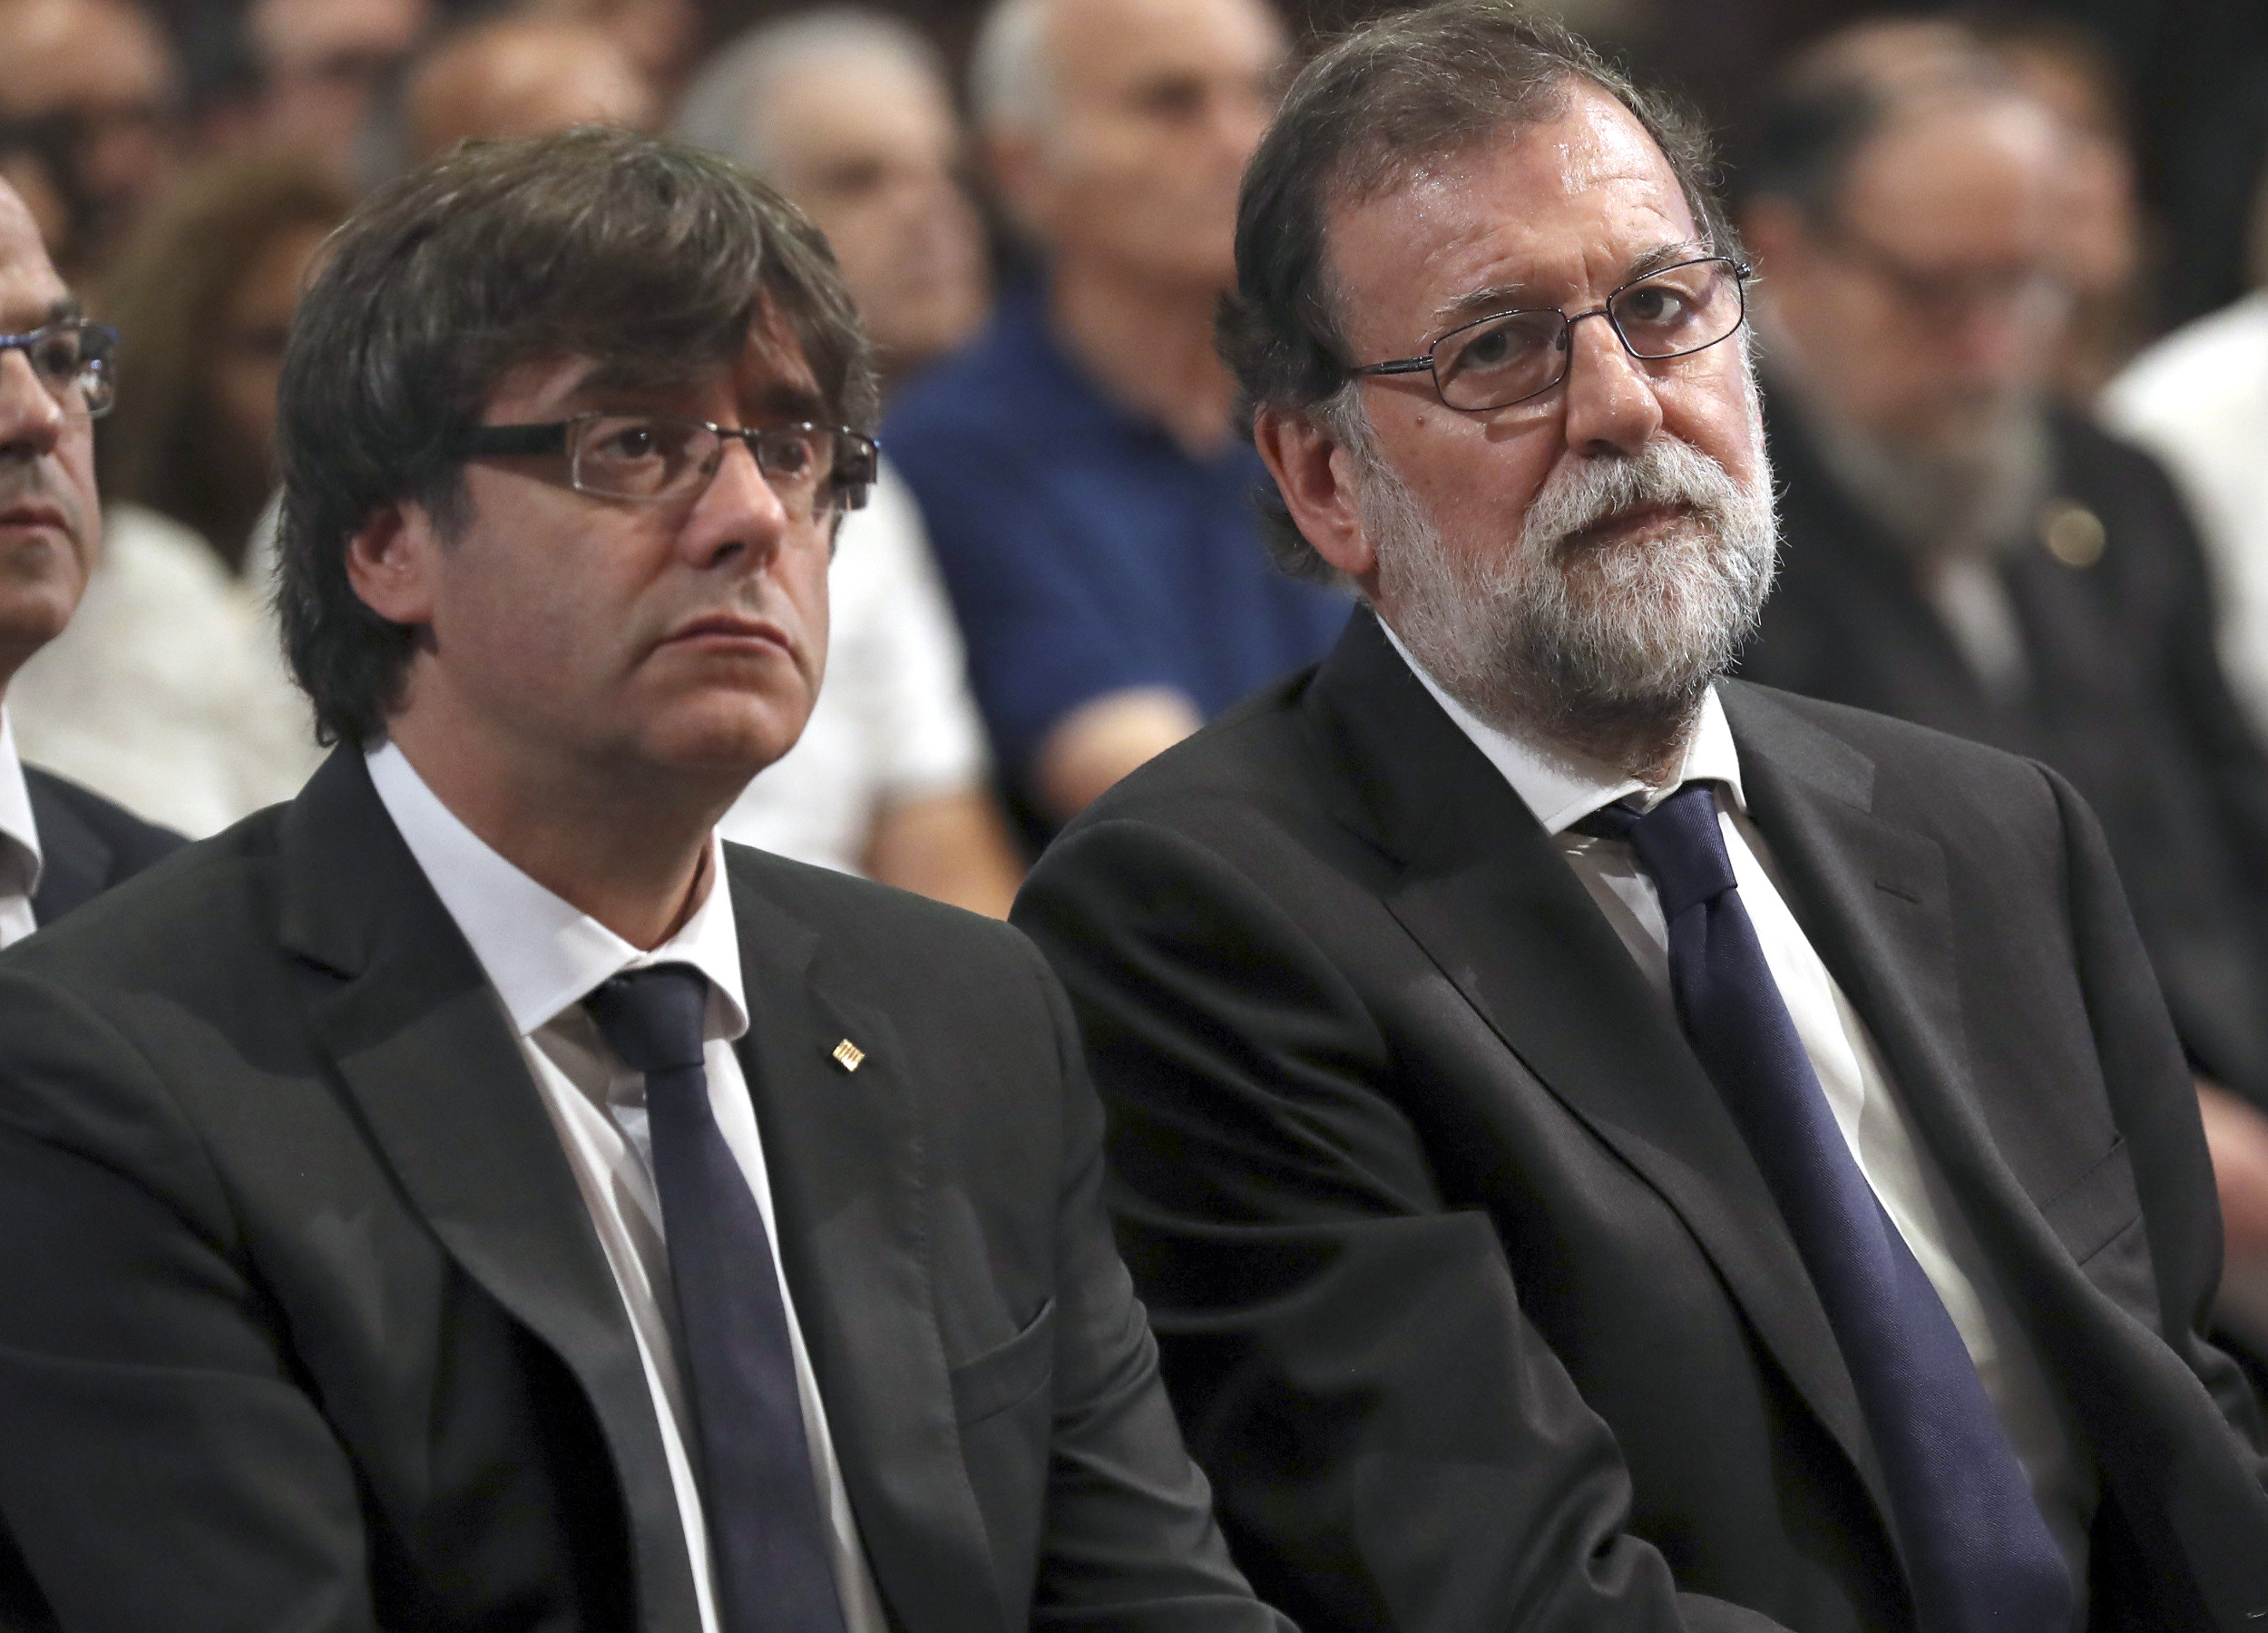 Catalan president Carles Puigdemont (left) and Spanish president Mariano Rajoy (by EFE/Pool)